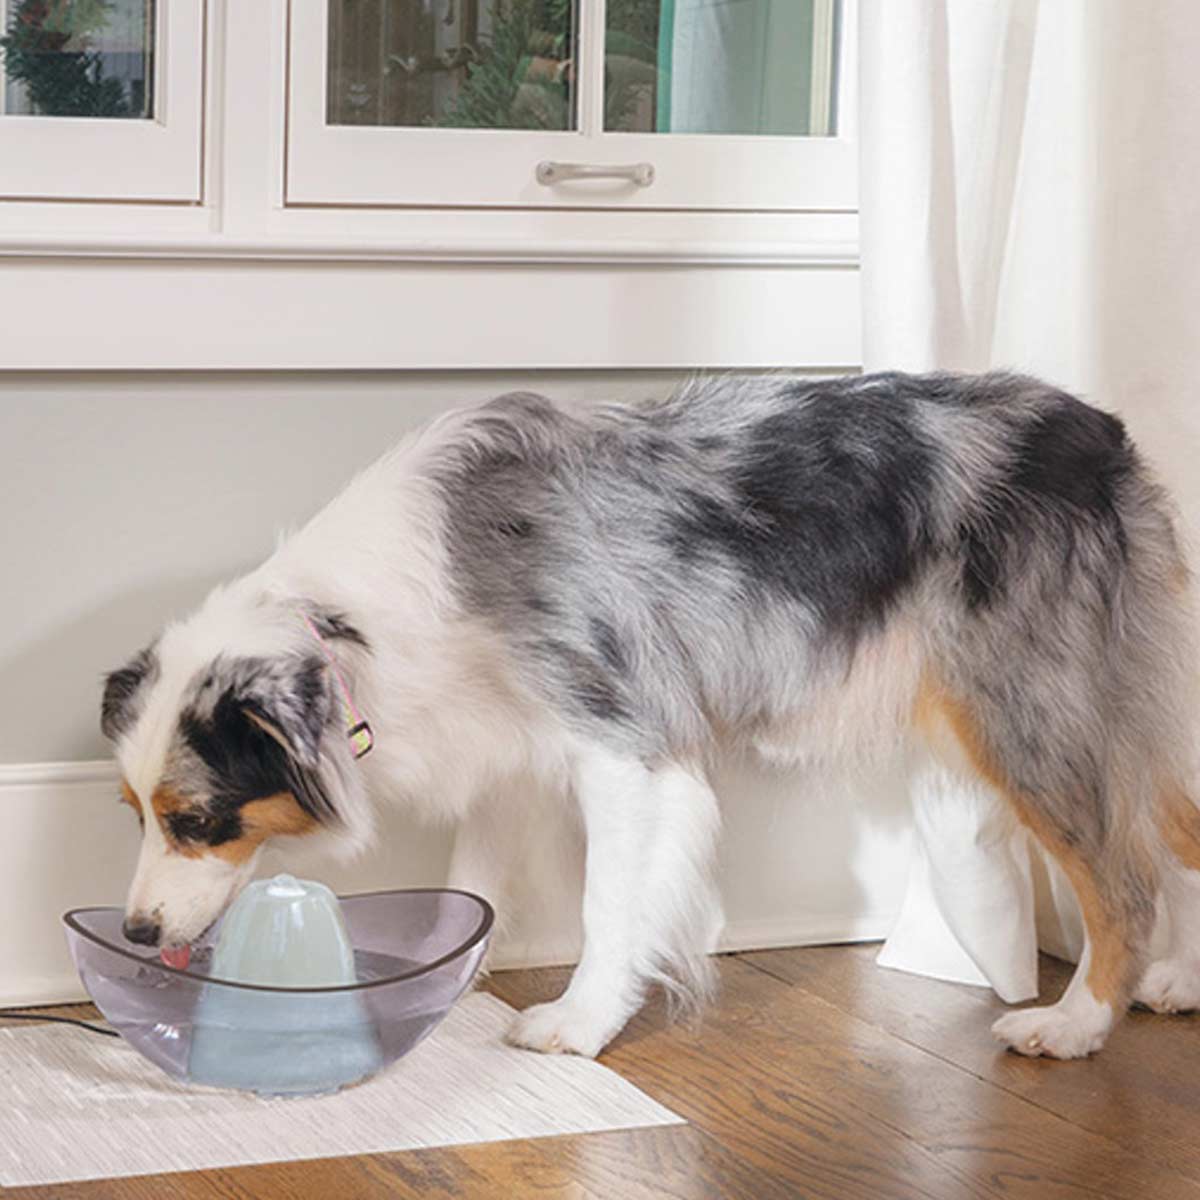 PetSafe Drinkwell Drinking Fountain SEDONA for cats and dogs